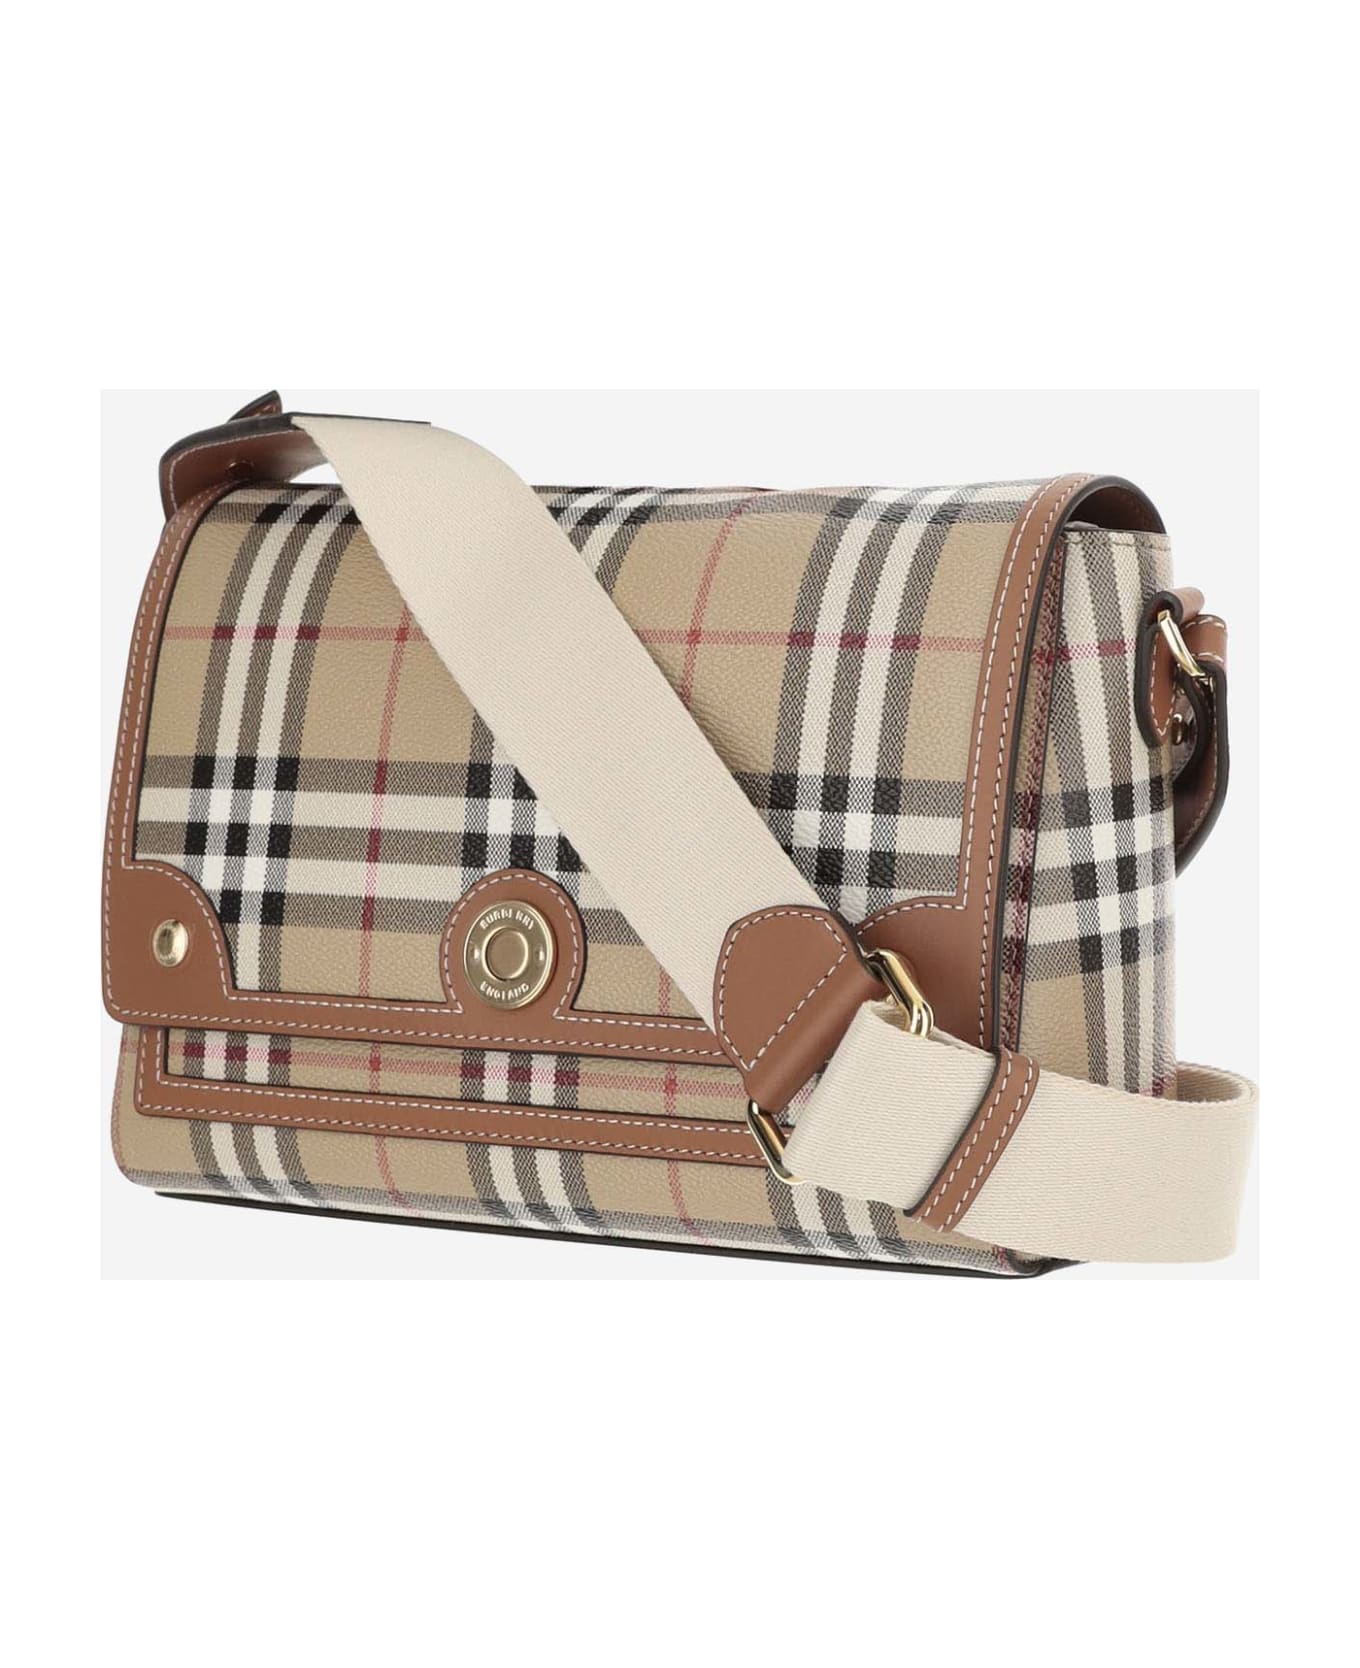 Burberry Bag With Check Pattern - Red